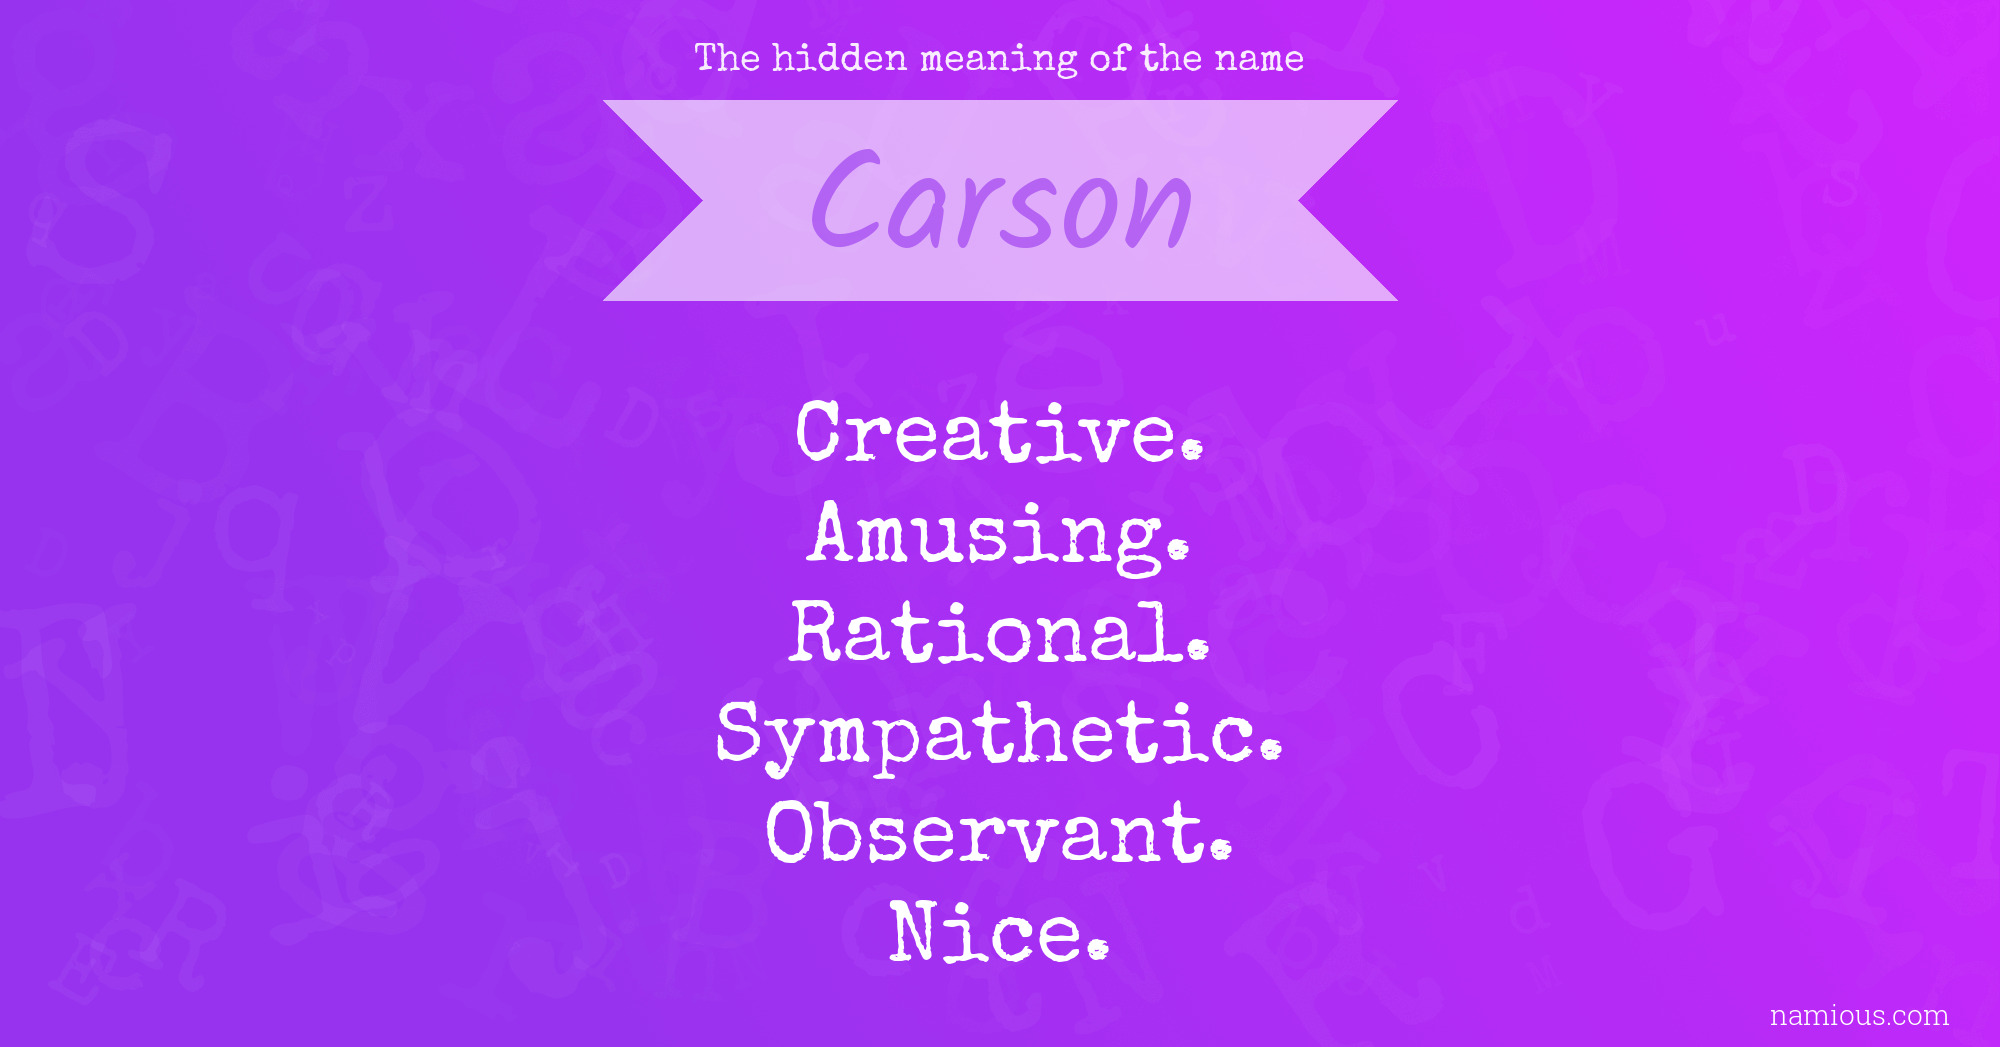 The hidden meaning of the name Carson